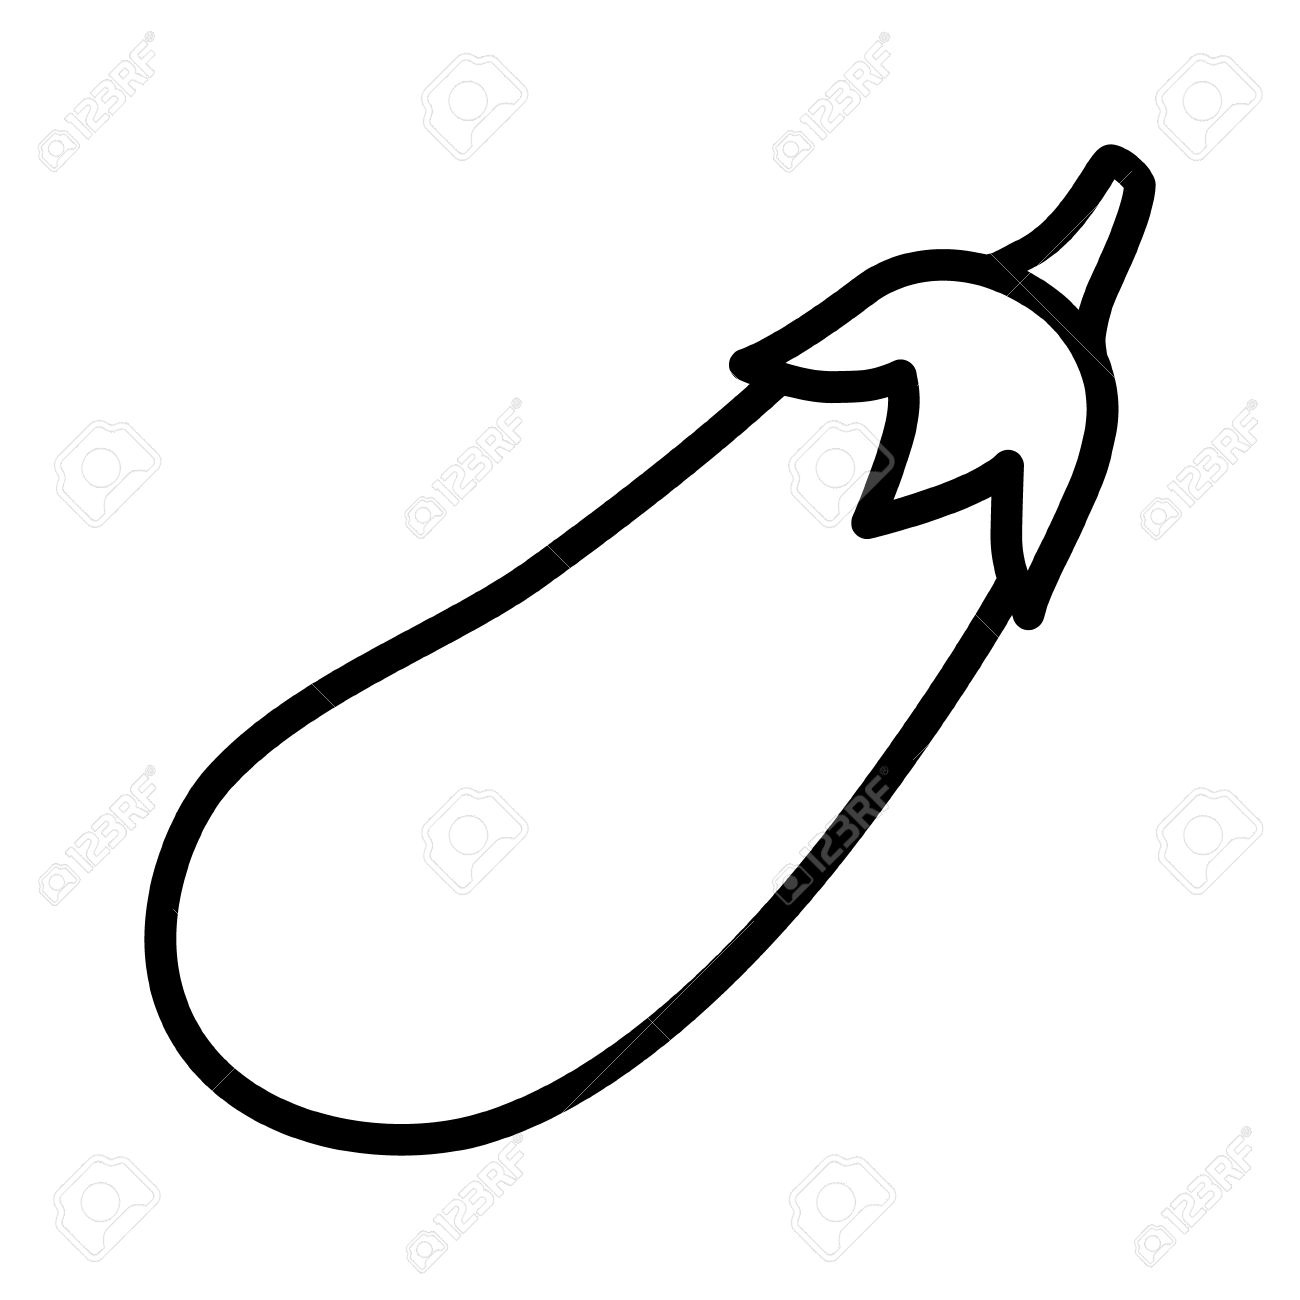 Eggplant clipart black and white. Free download best 